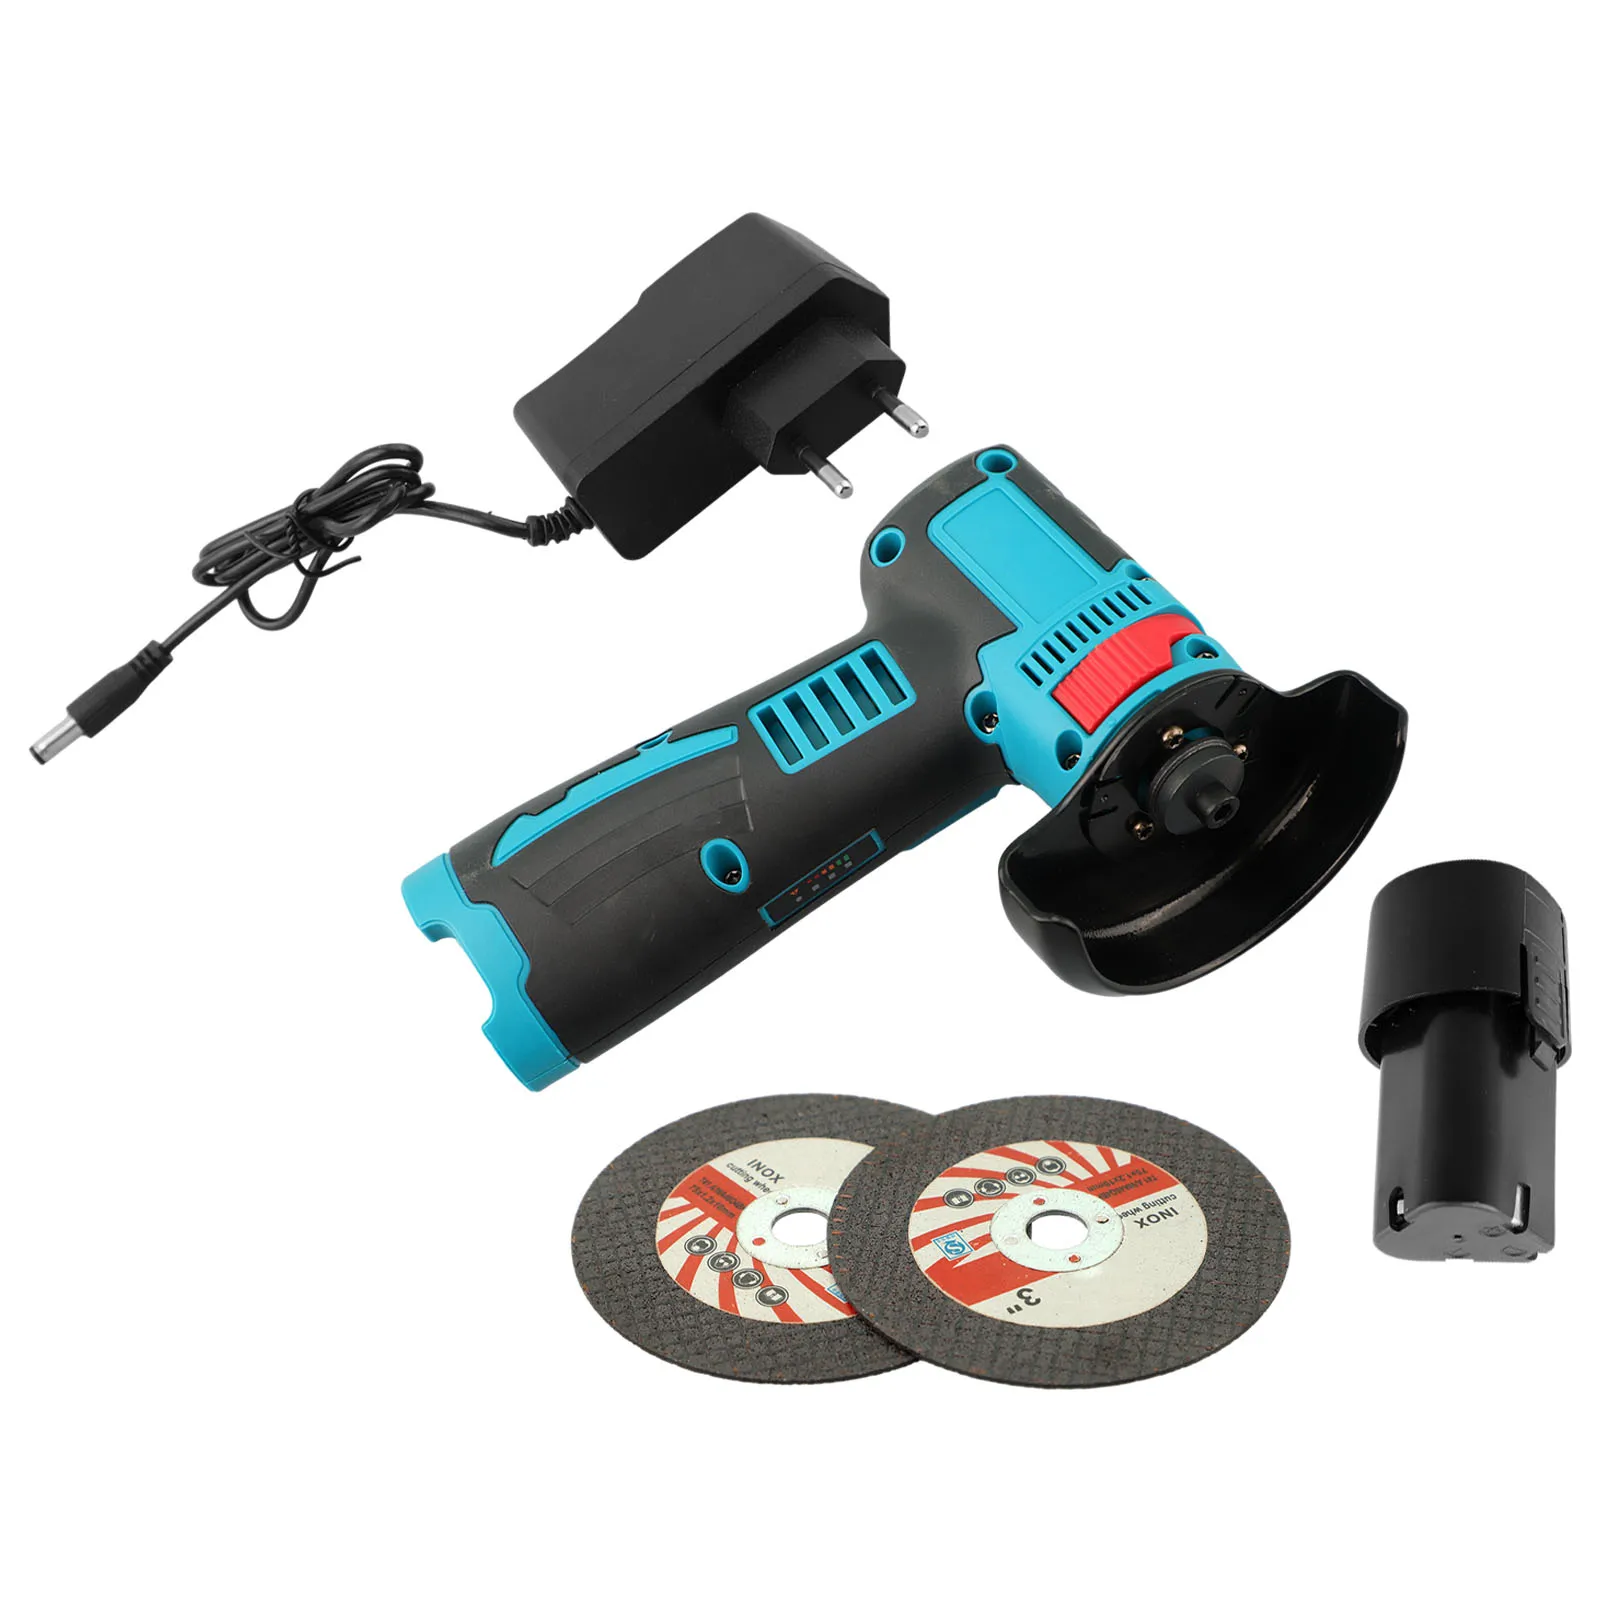 

12V Brushless Angle Grinder 19500RPM Rechargeable Grinding Tool Cutting Grinder Workshop Equipment Abrasive Tools Power Tools